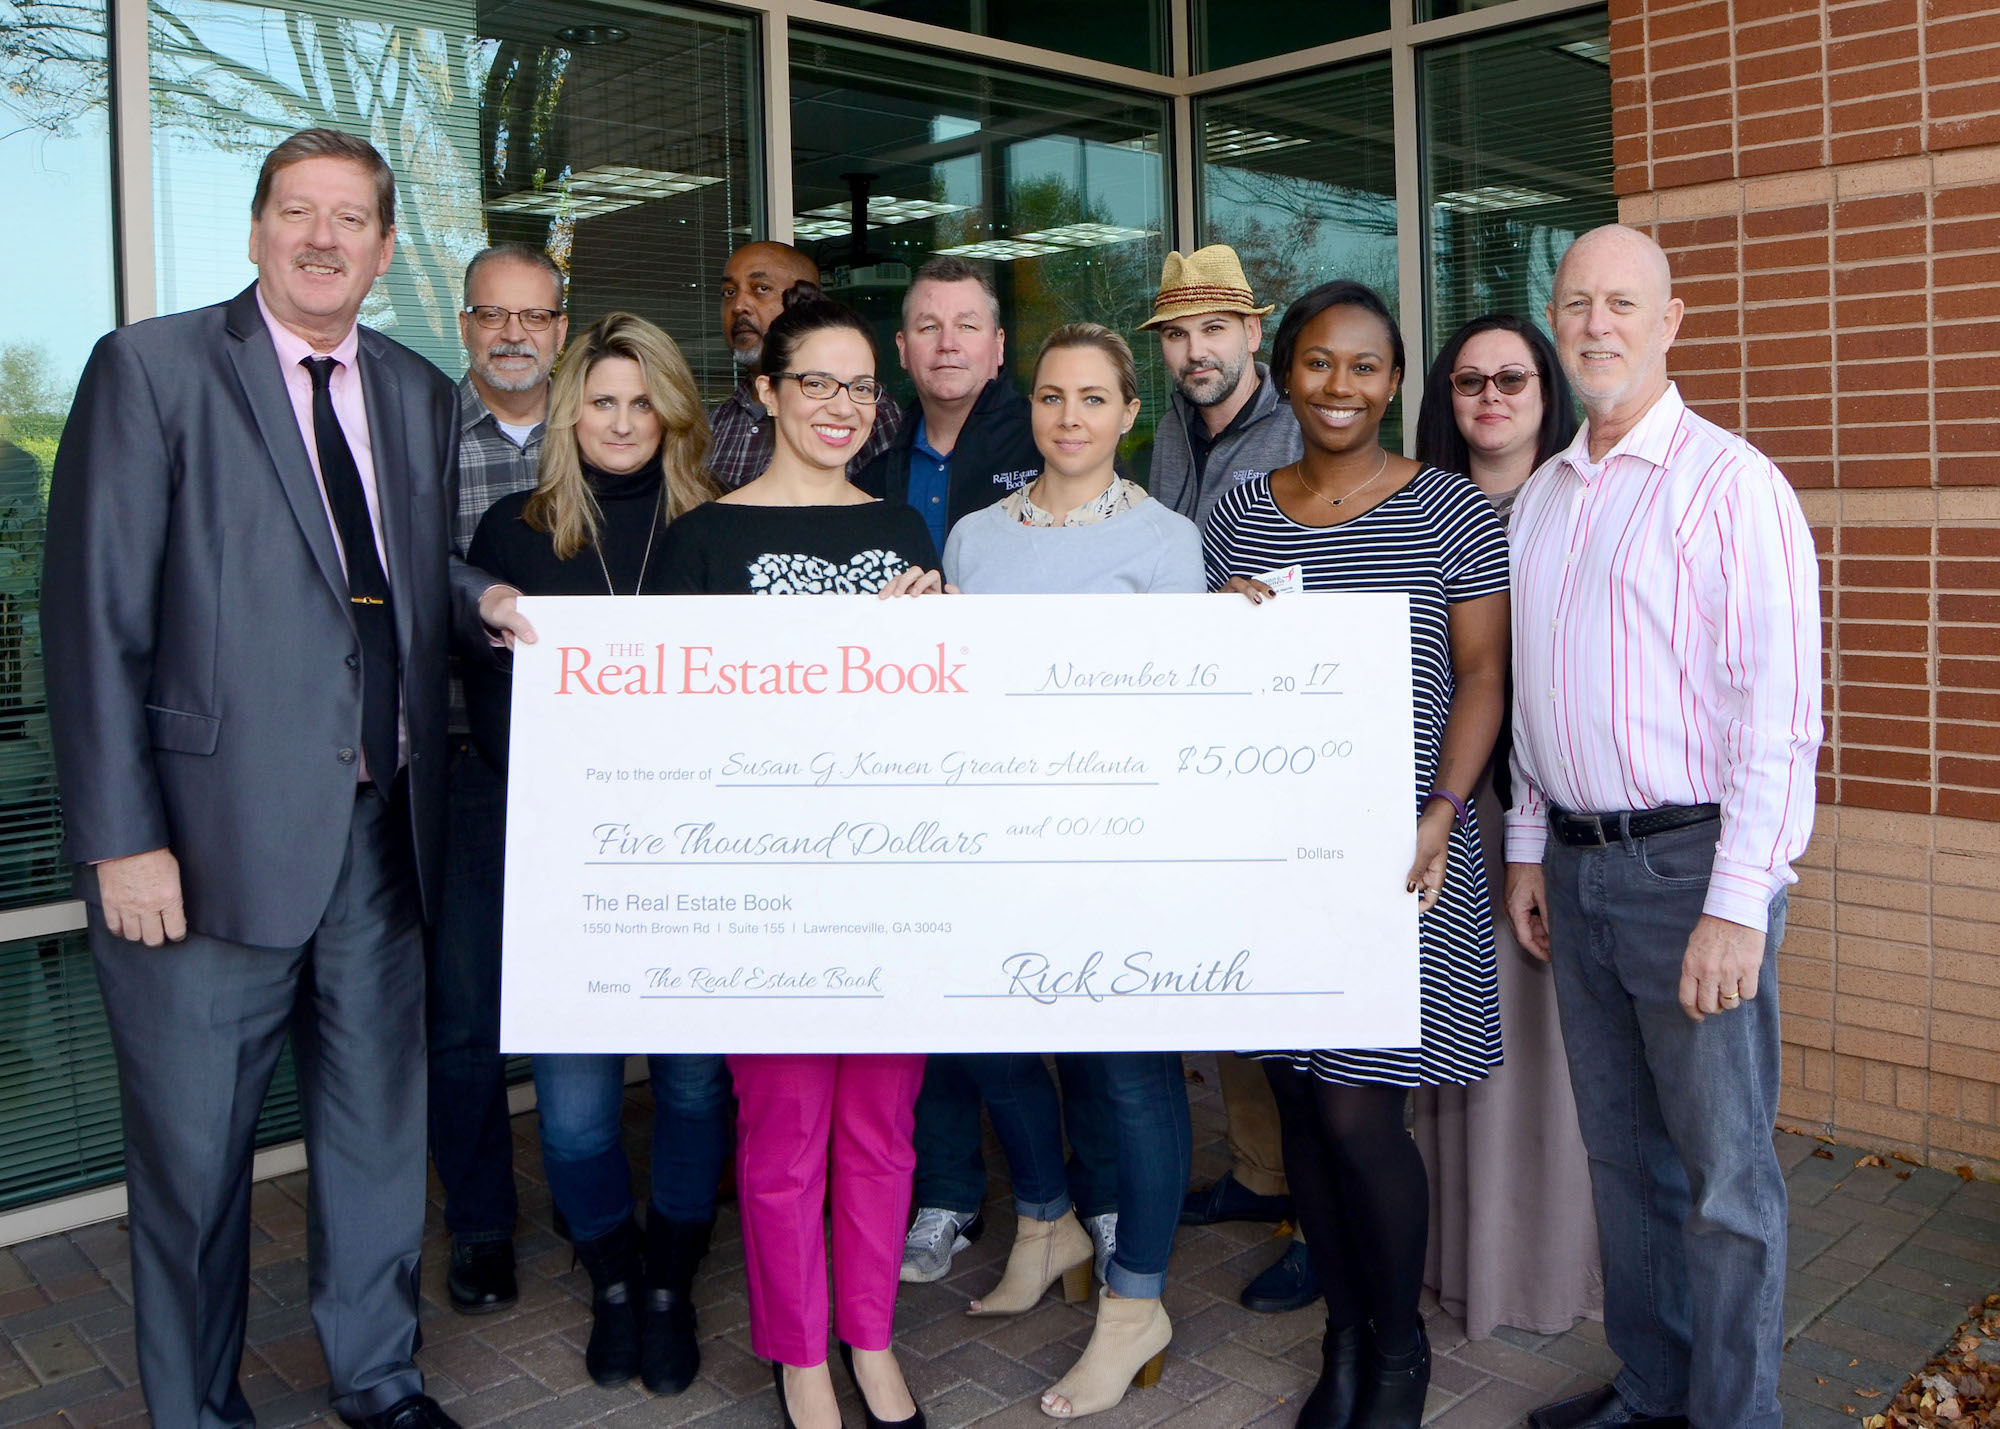 The Real Estate Book Senior Vice President and Brand Leader Rick Smith (left) and team donate check to Susan G. Komen Greater Atlanta